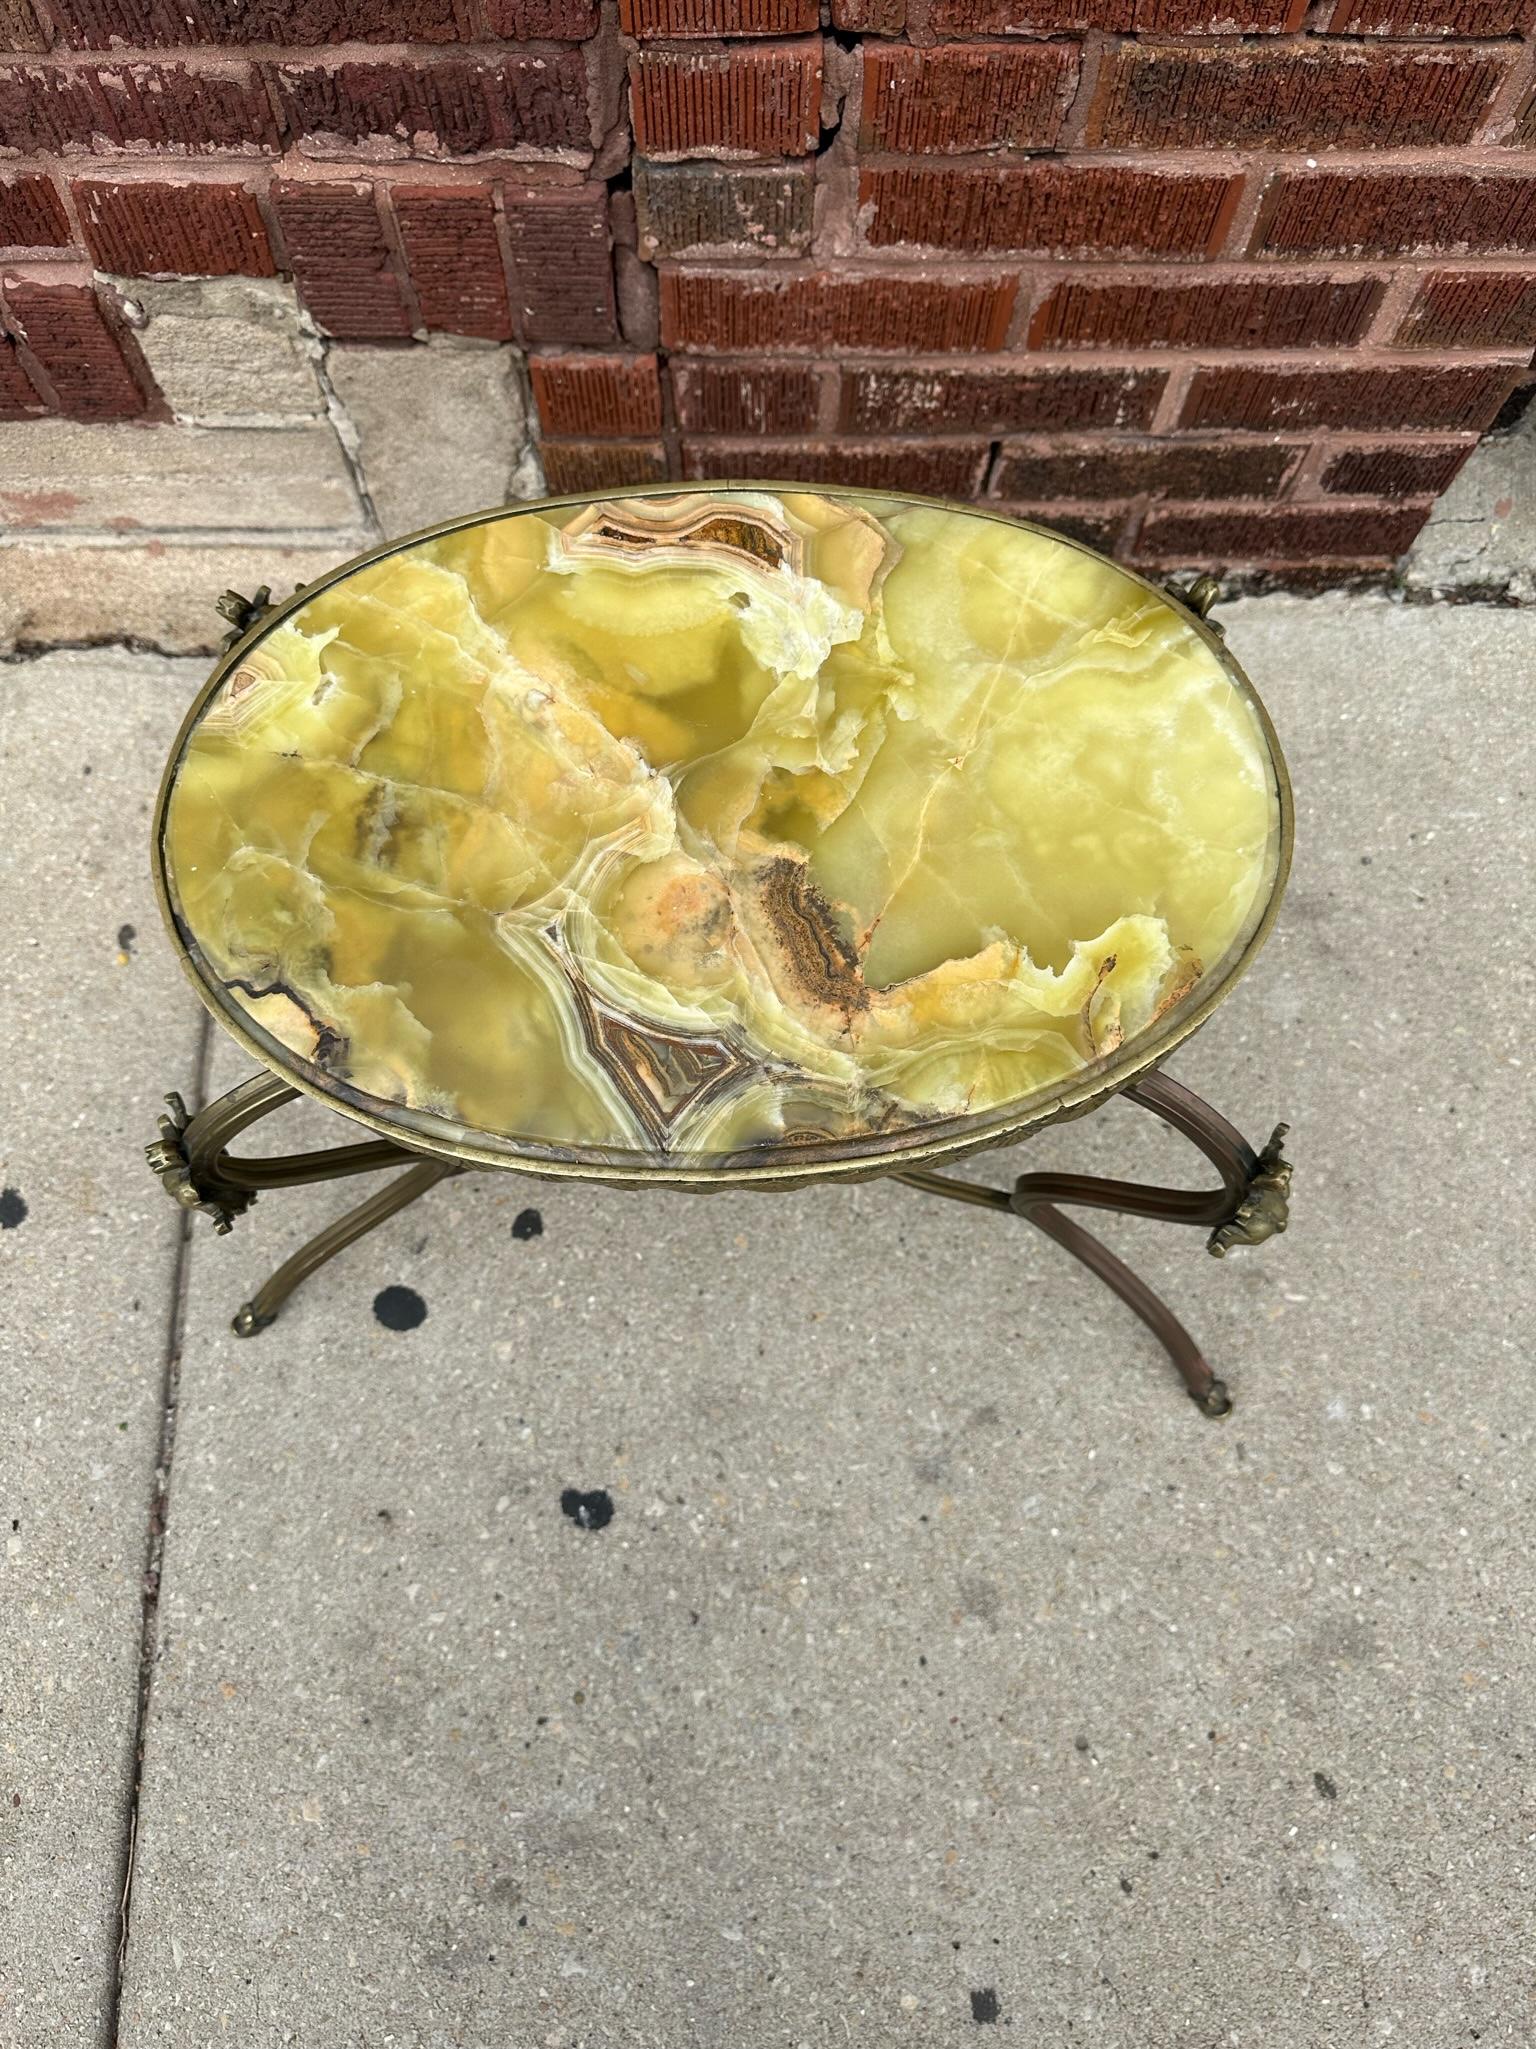 Antique Victorian 2 Tier Ornate Onyx and Brass Figural Devil Heads Side Table 

Beautiful Beveled Edge Oval Green Onyx with Intricate Detailed Ornate Brass Frame with 4 Figural Devil Heads Side Table. 

Perfect Addition Of Old Hollywood Glam to Your